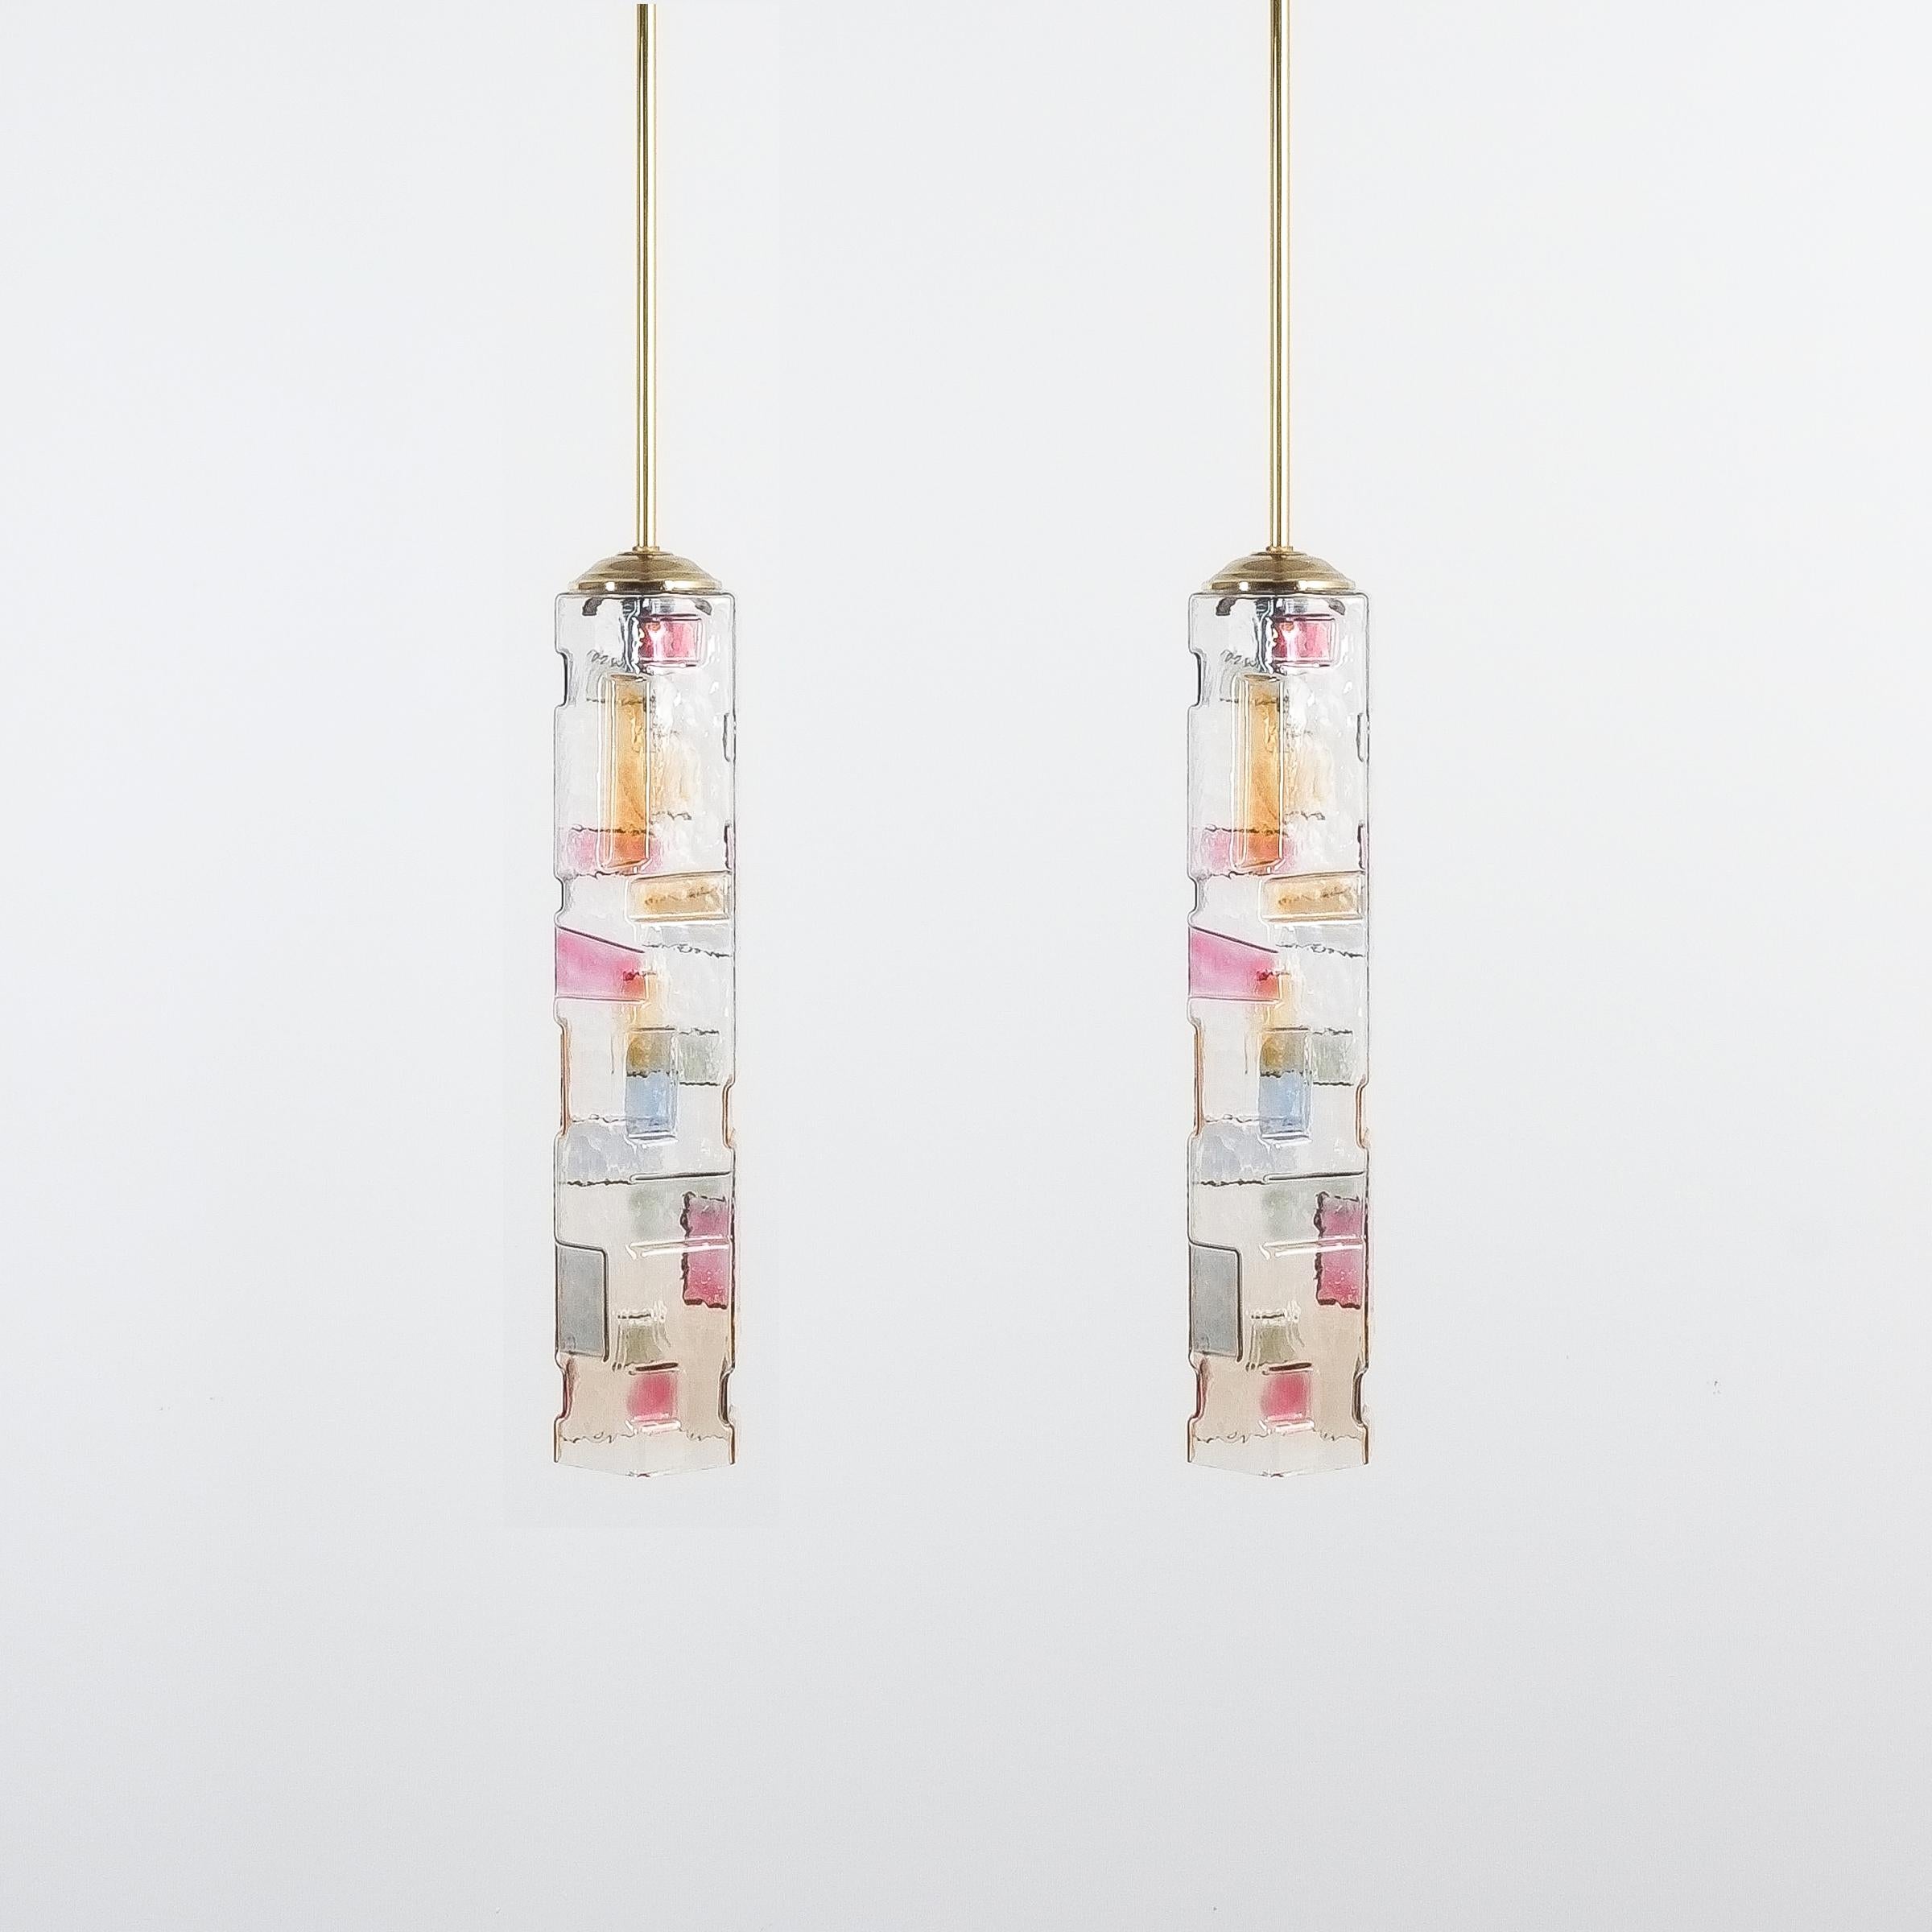 Pair of colored glass pendant lamps style Poliarte, Italy, circa 1955. Nice pair of slender glass hexagonal tubes with some three-dimensional and colored patterns. The condition is very good, refurbished an newly rewired. Dimensions of the light